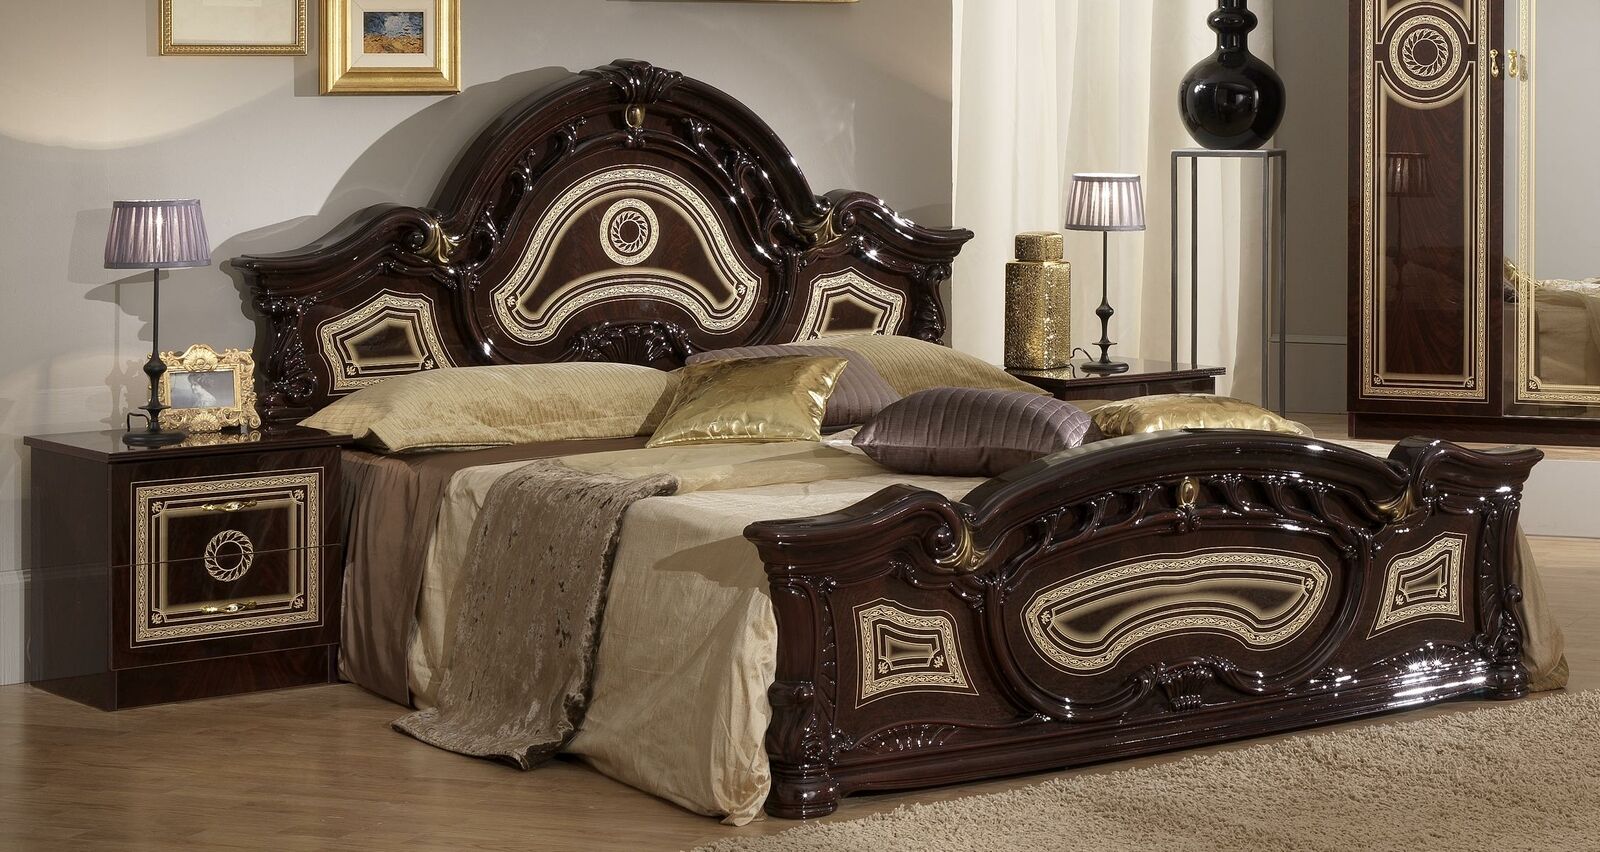 Classic baroque style designer massive double bed made of real gloss wooden